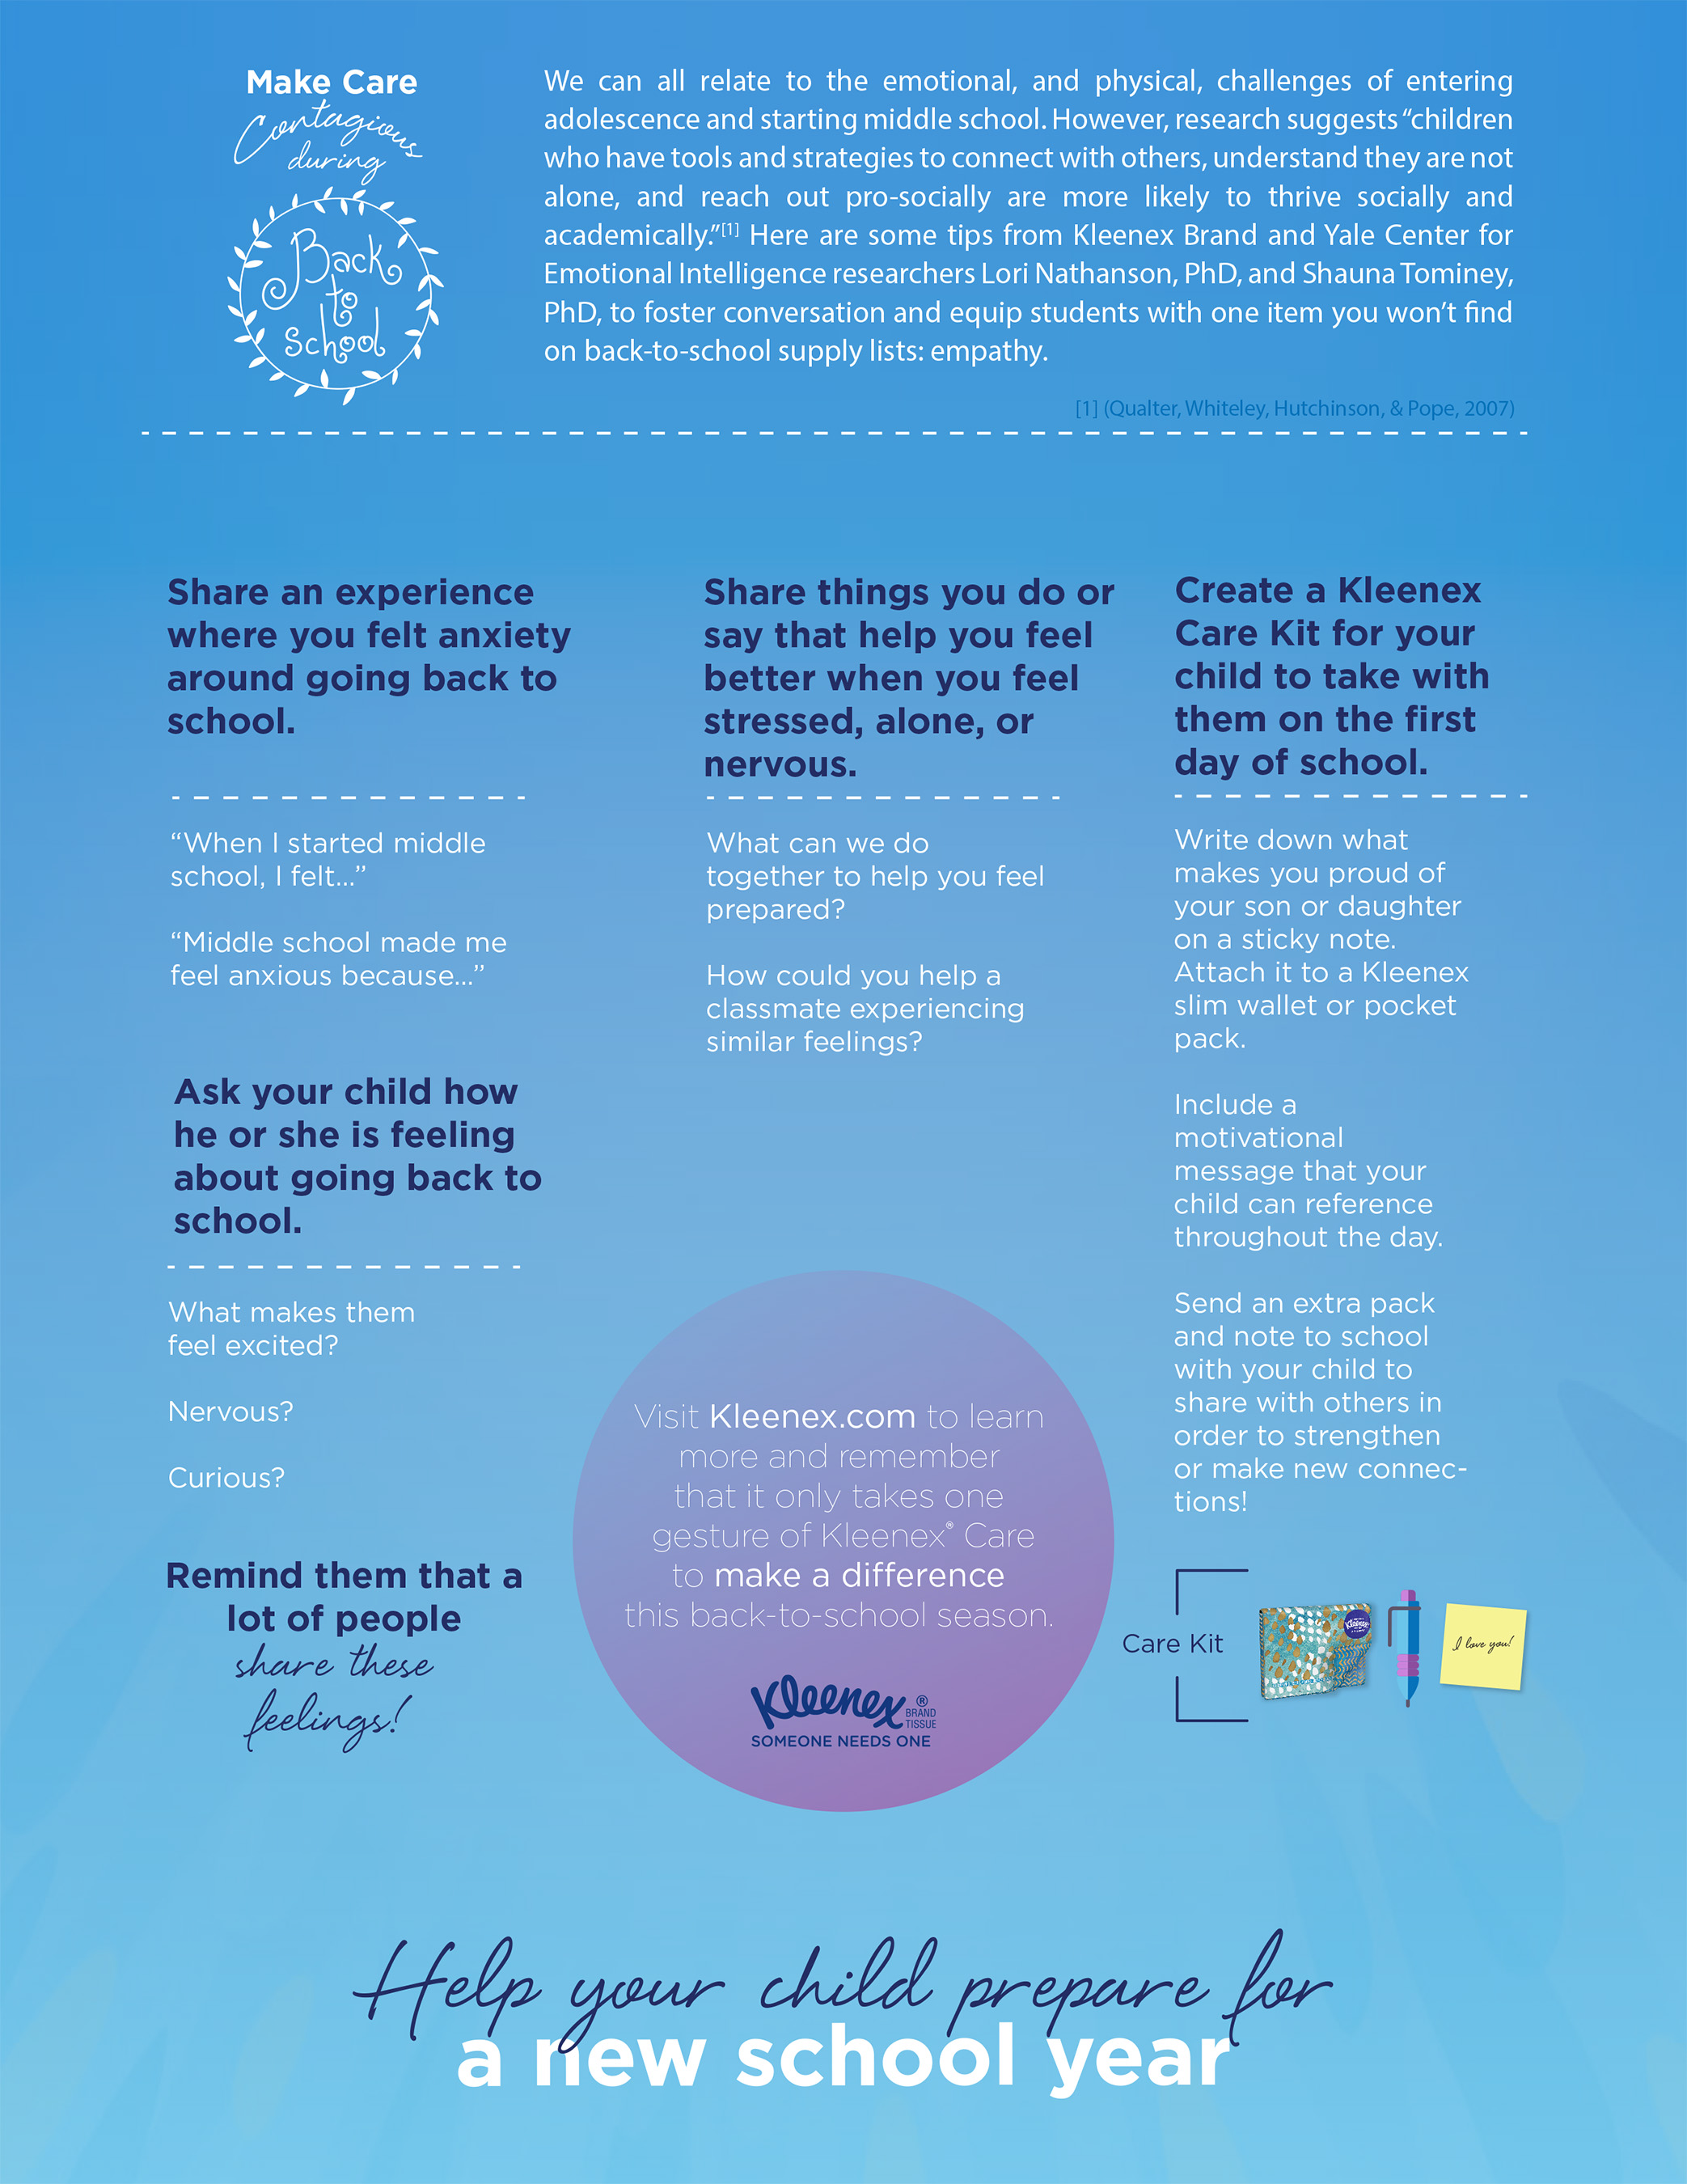 Kleenex® brand and Yale researchers share tips to help children prepare for a new school year.